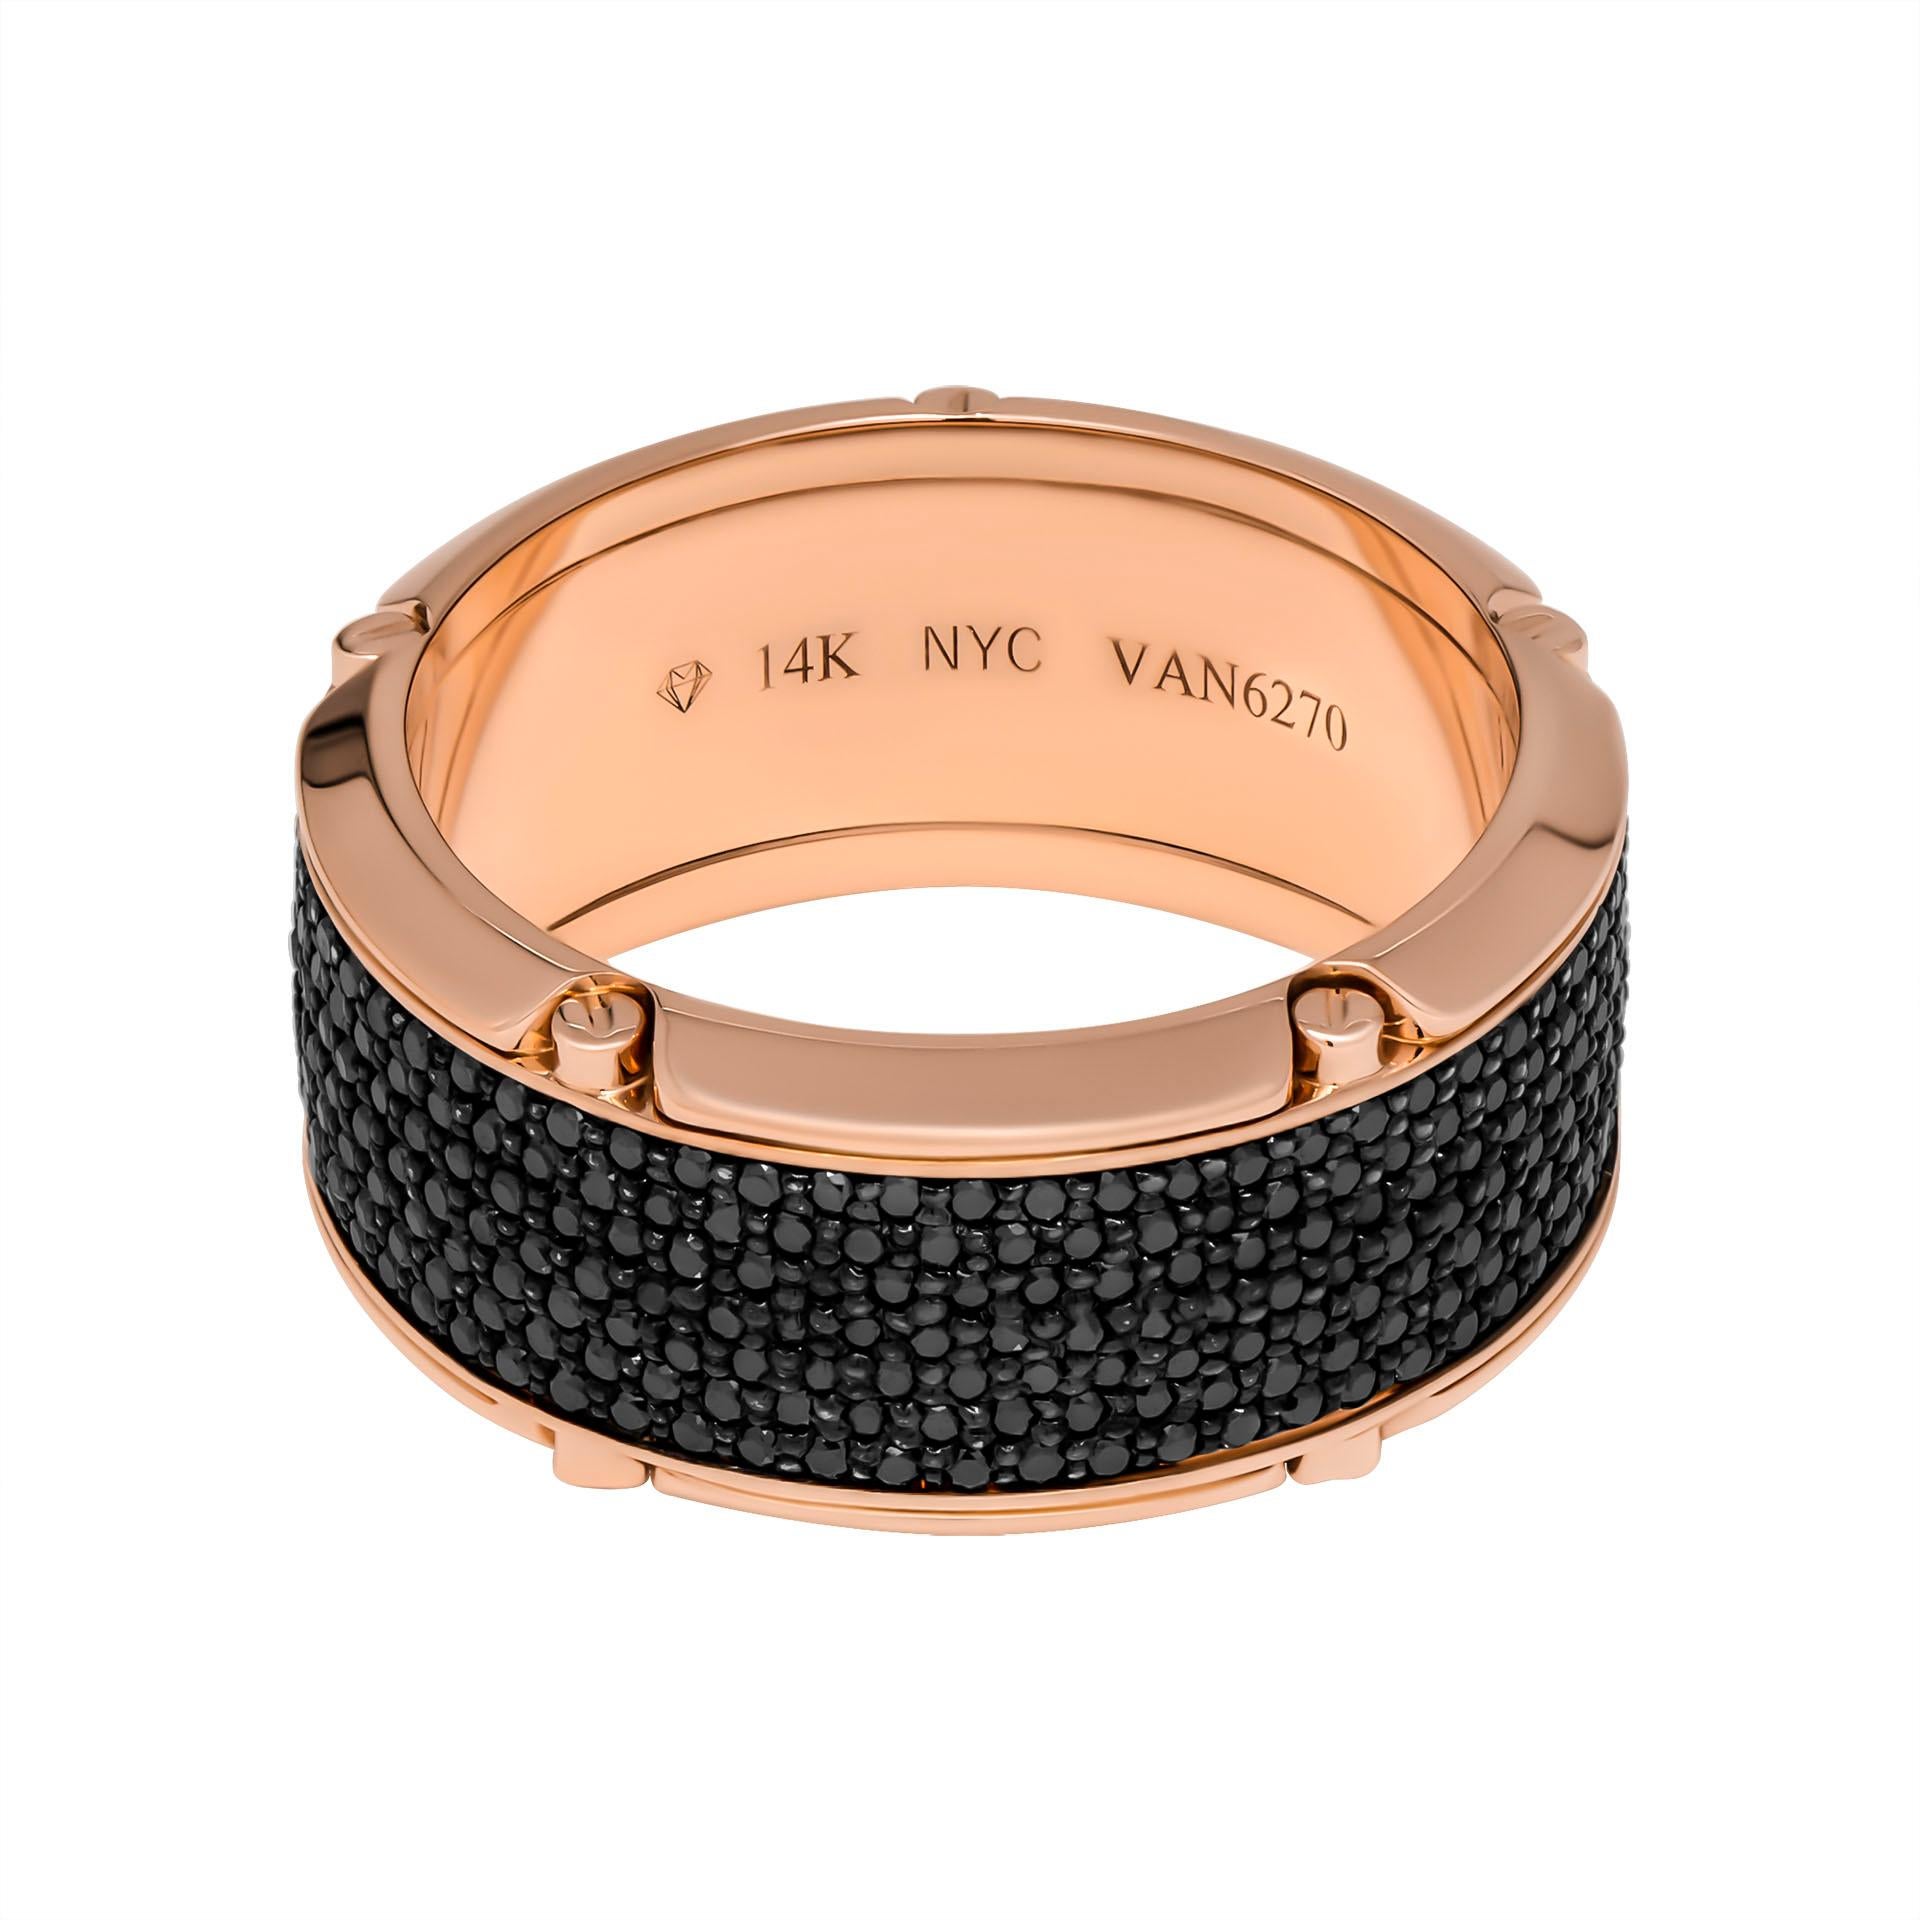 Gentleman's  band in 14k RG with Black Diamonds

Size:10.75 
Total Carat Weight: 2.29ct (420st) 